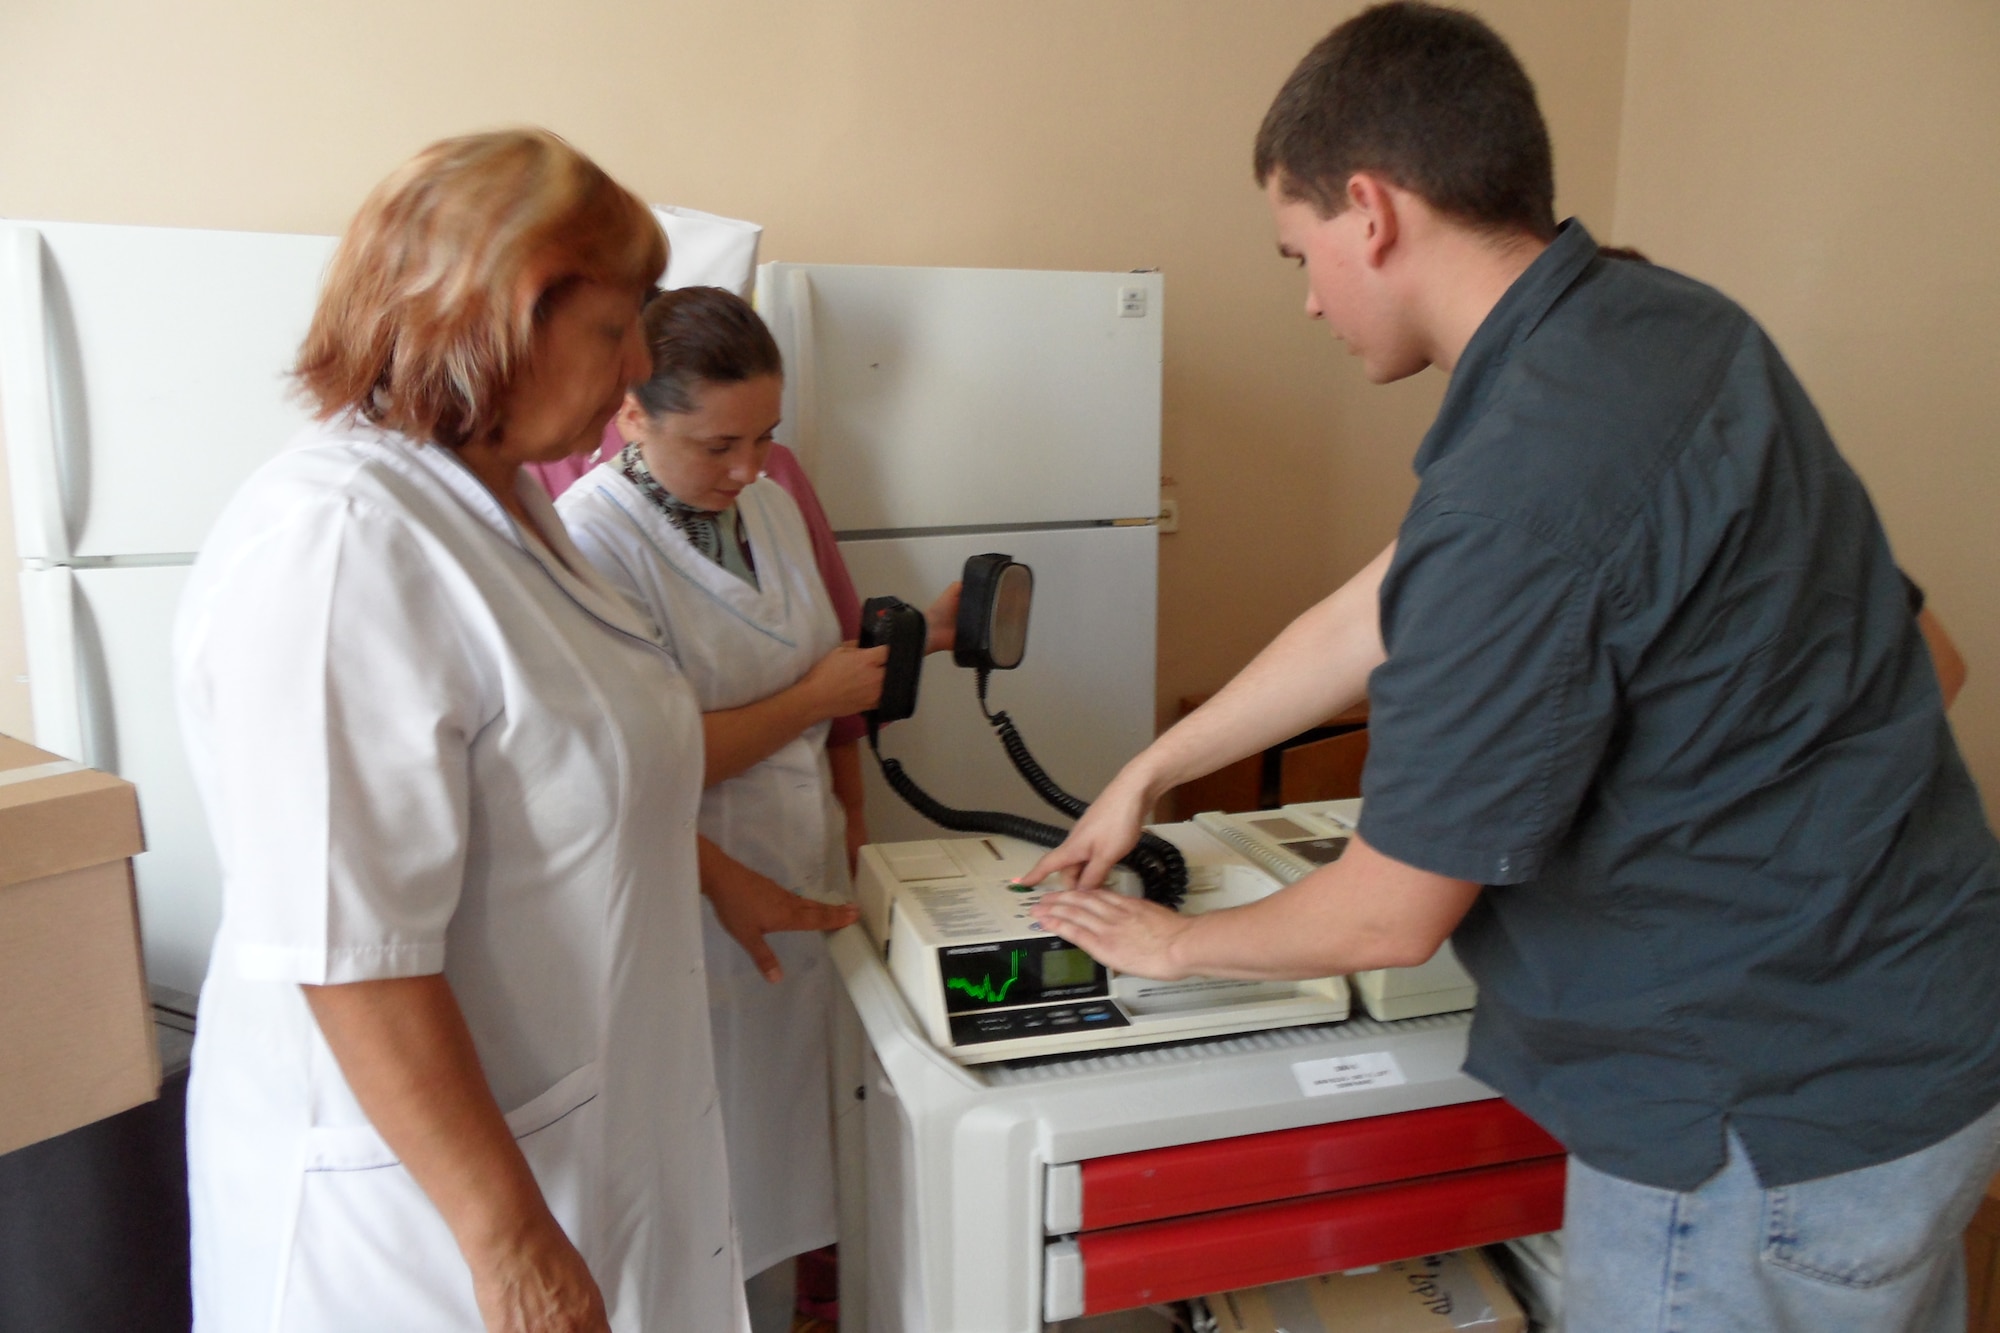 Biomedical equipment technician, Alek Neloms explains the set-up of an electro surgical unit to Ukrainian nurses while supporting Operation Provide Hope. This year’s operation, supported by 14 U.S. Air Forces in Europe airmen, wrapped up after several months of planning and execution as well as pulled resources to support Crimea, Ukraine. (courtesy photo)